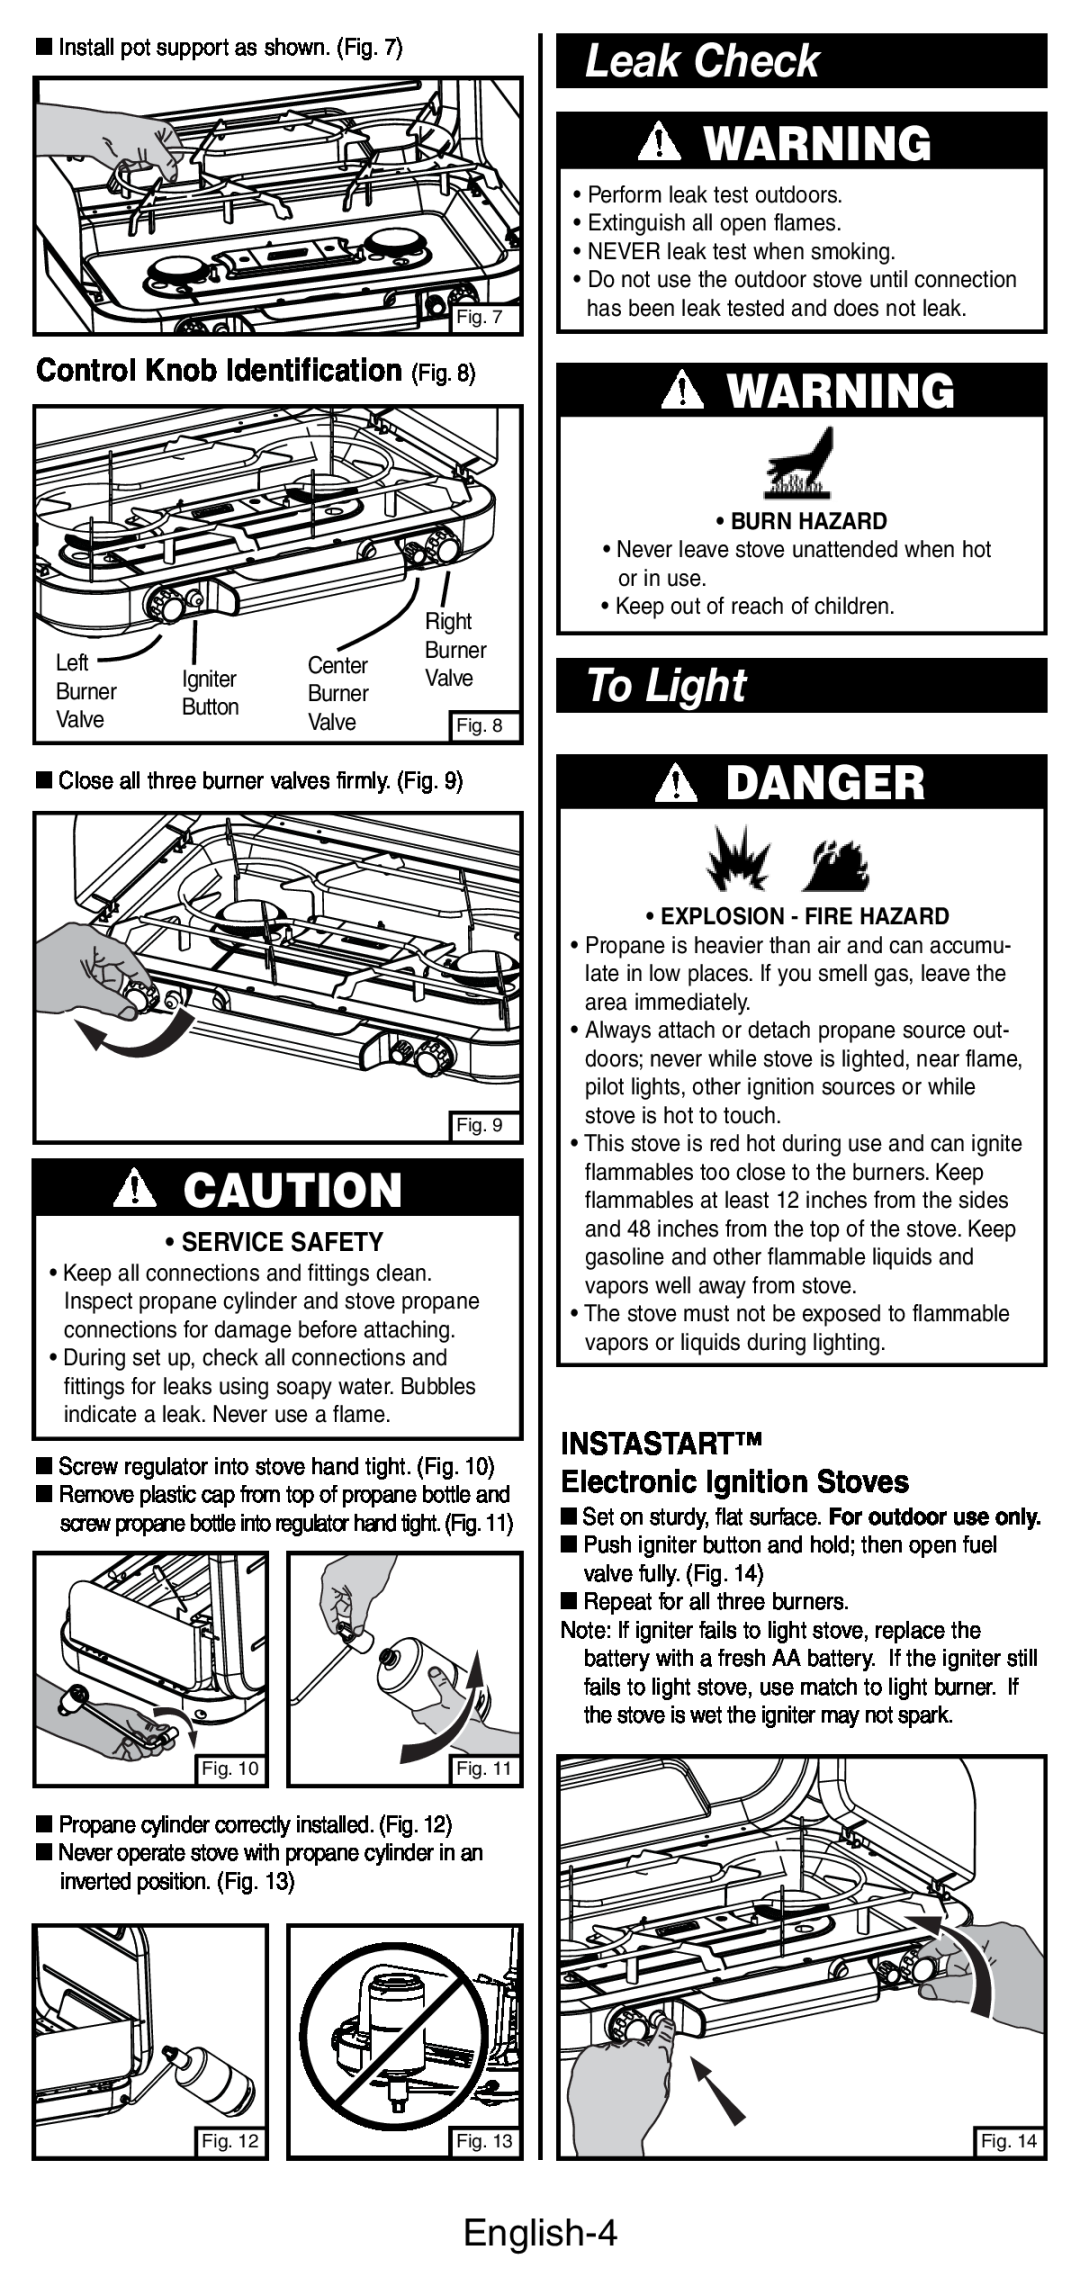 Coleman 5444 Series manual Leak Check, To Light, Danger, English-4, INSTASTART Electronic Ignition Stoves, Service Safety 